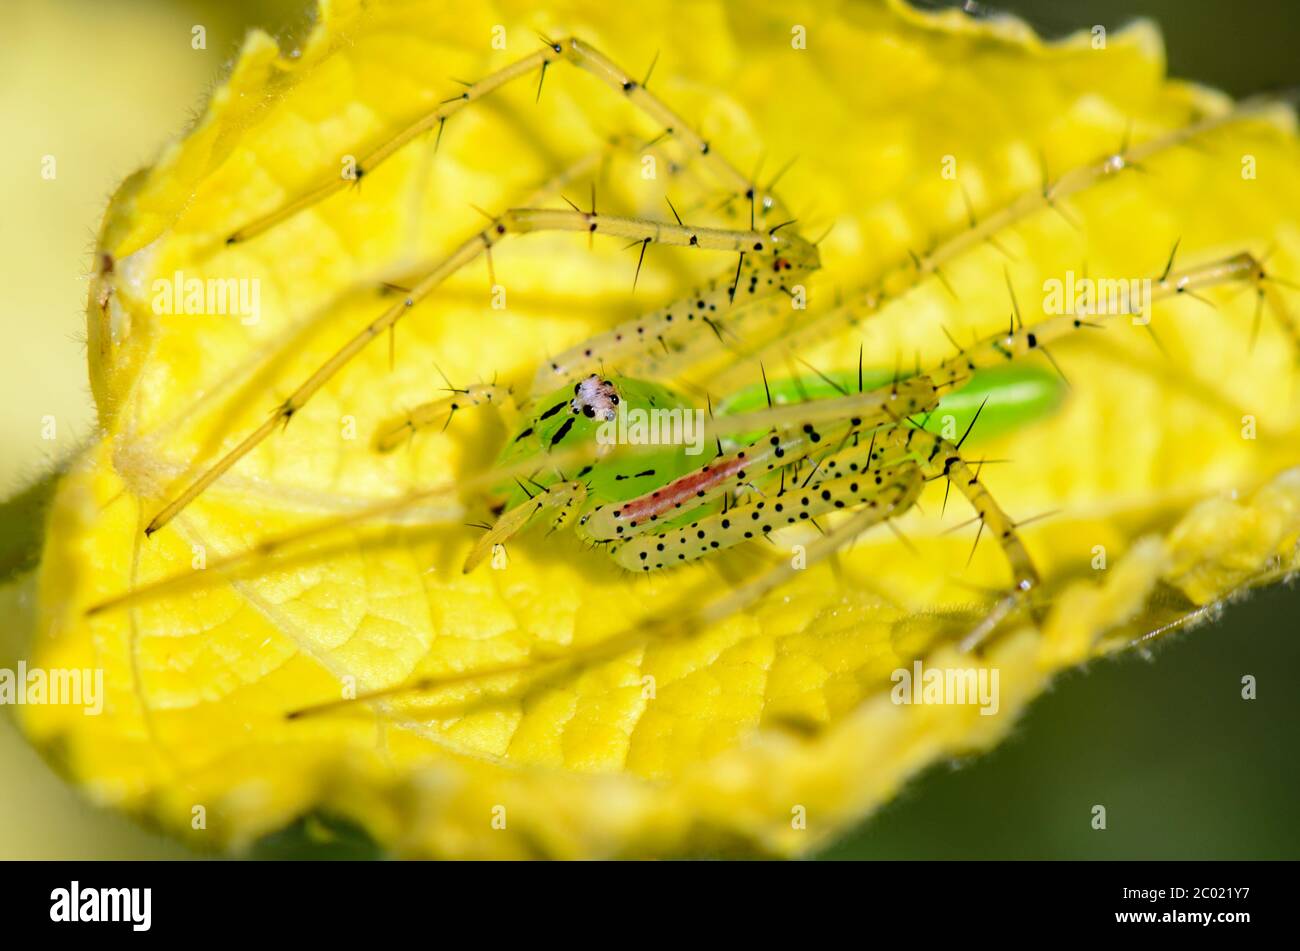 Green Lynx Spider is a conspicuous bright-green spider found on plant leaves Stock Photo